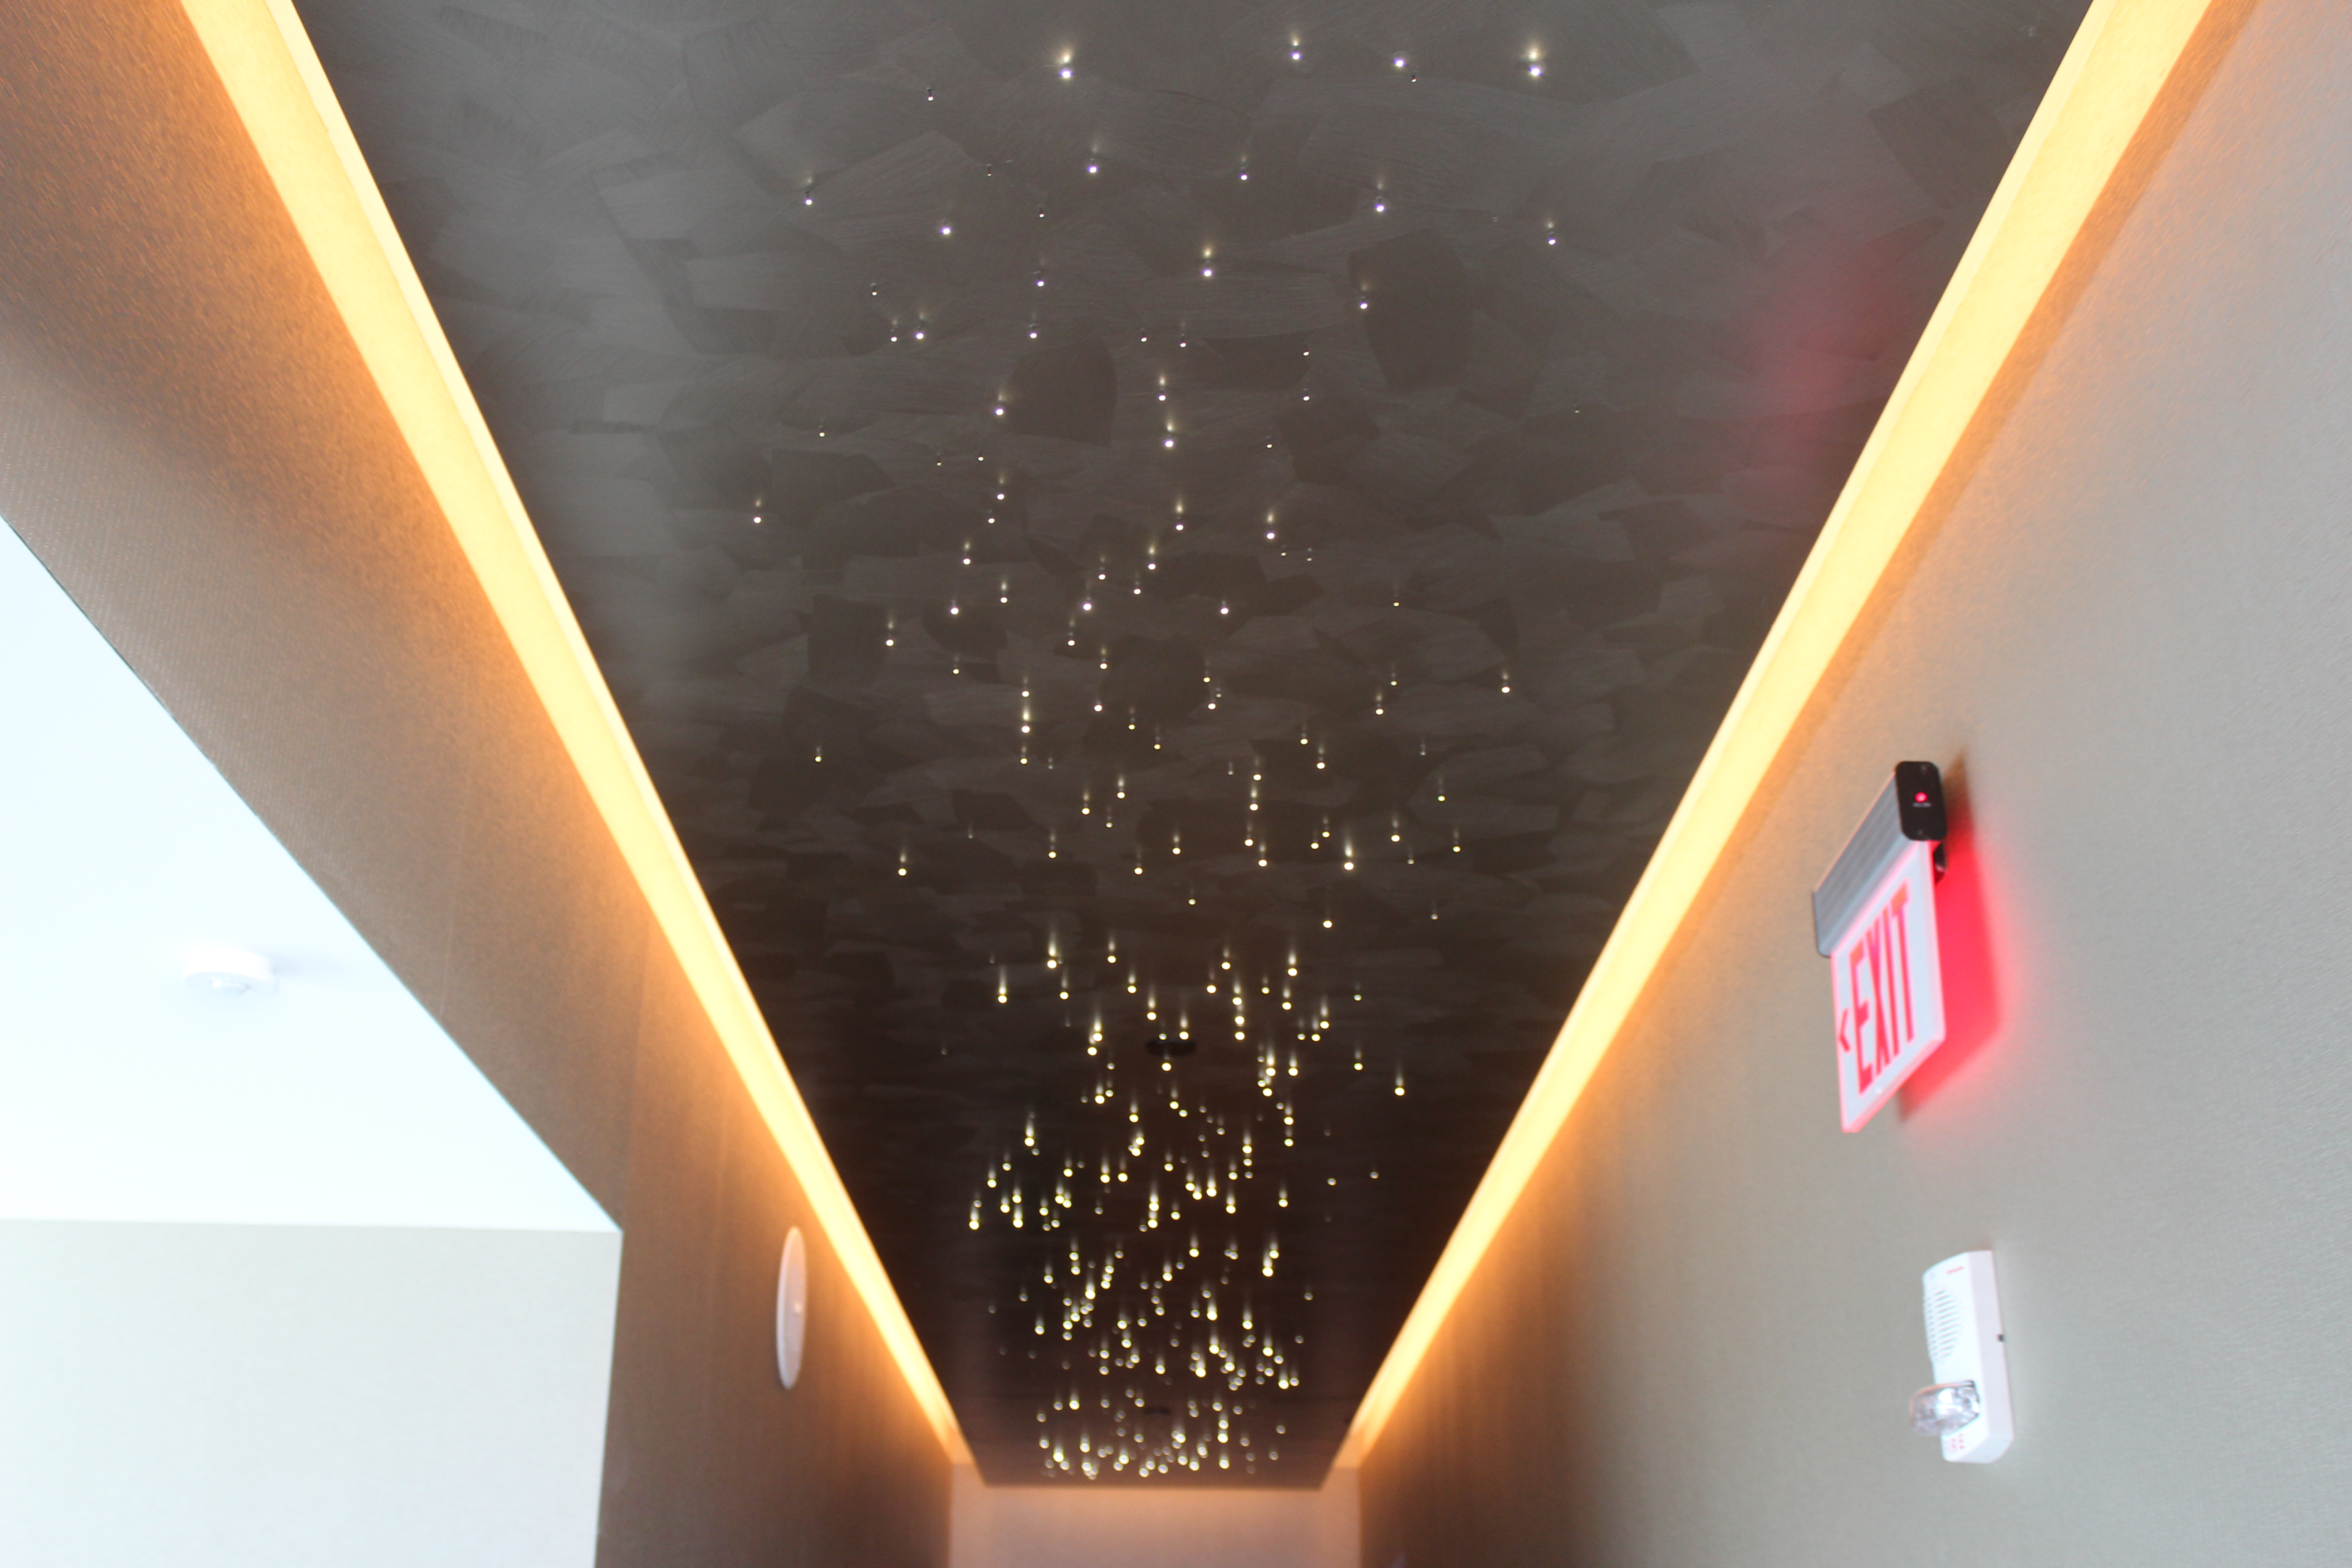 United Polaris Lounge San Francisco Starry Ceiling in a Hallway